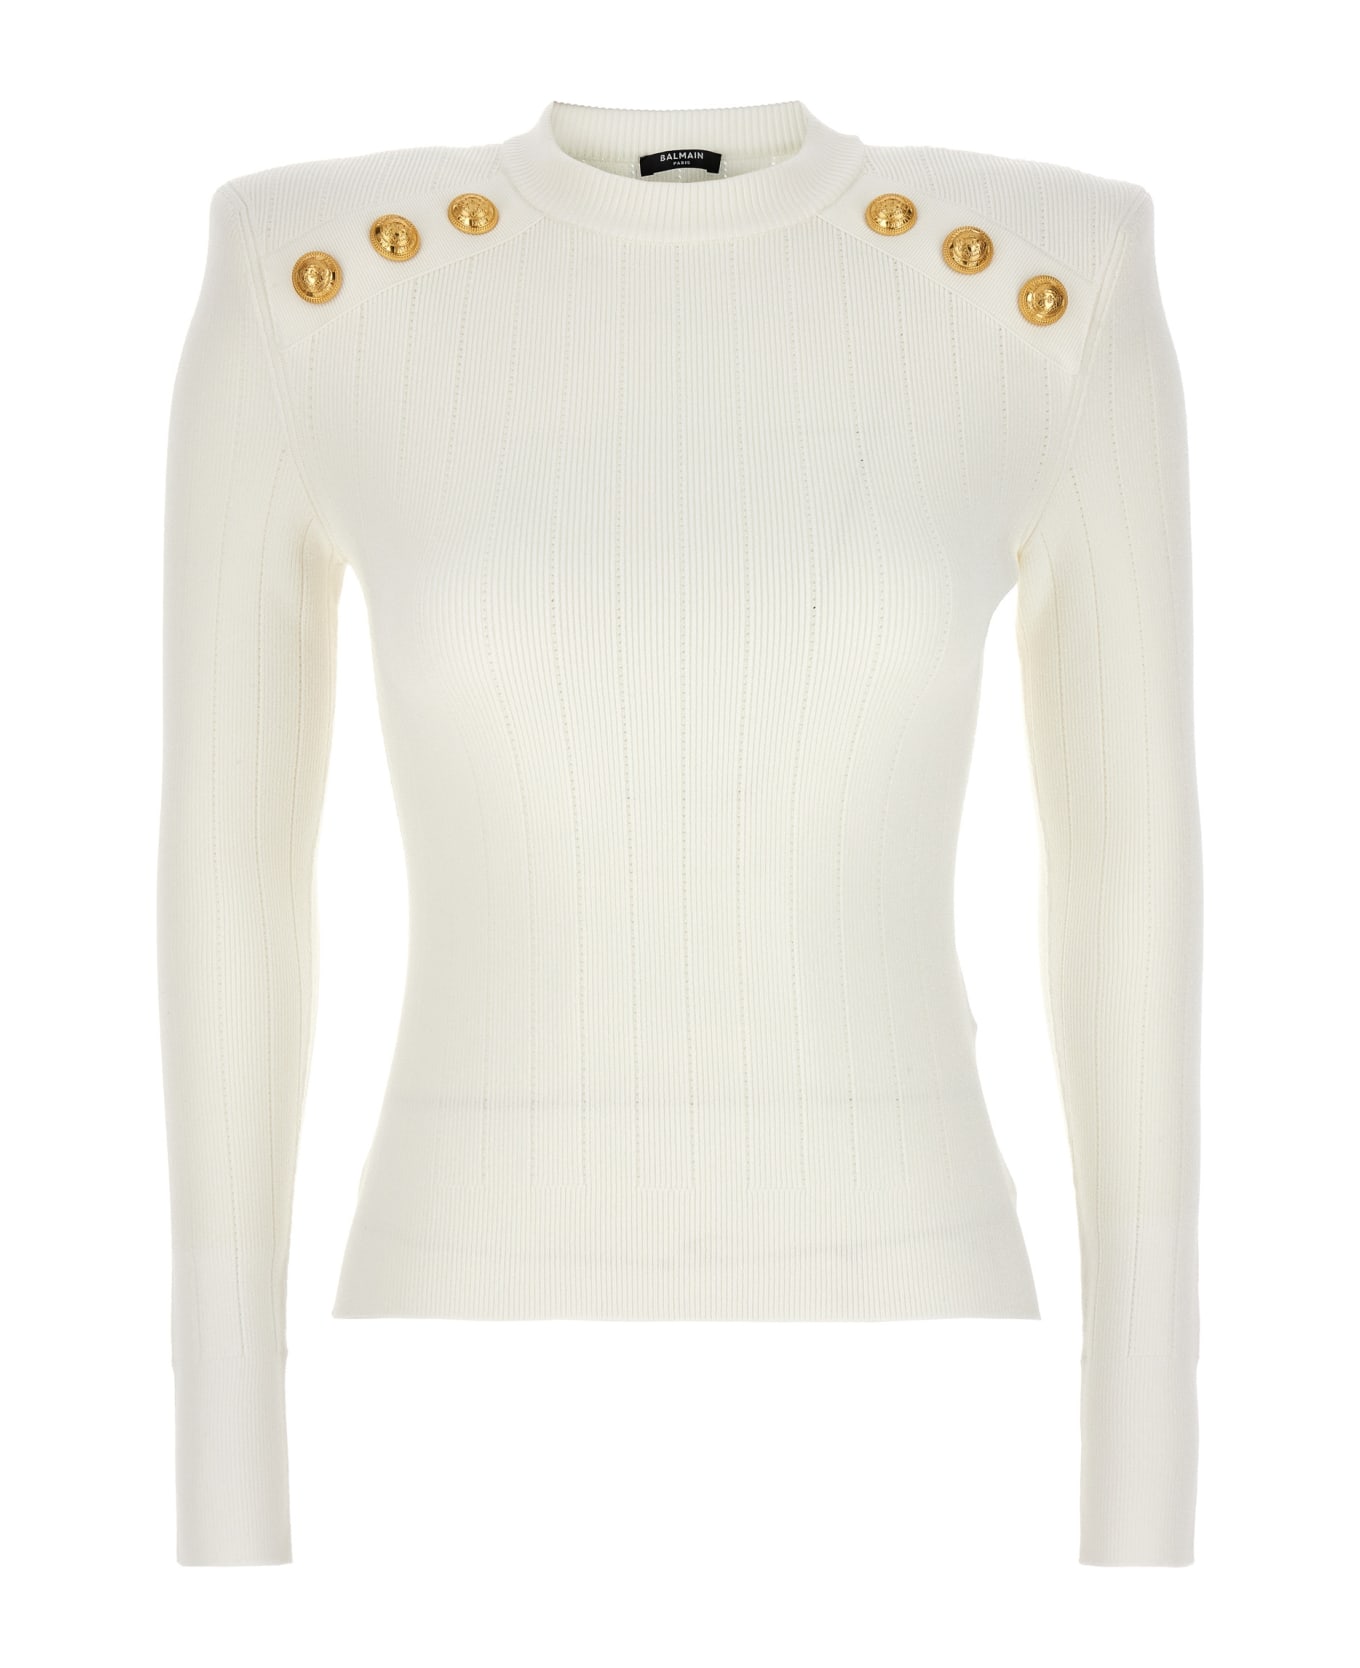 Balmain Crew-neck Sweater With Buttons - White ニットウェア